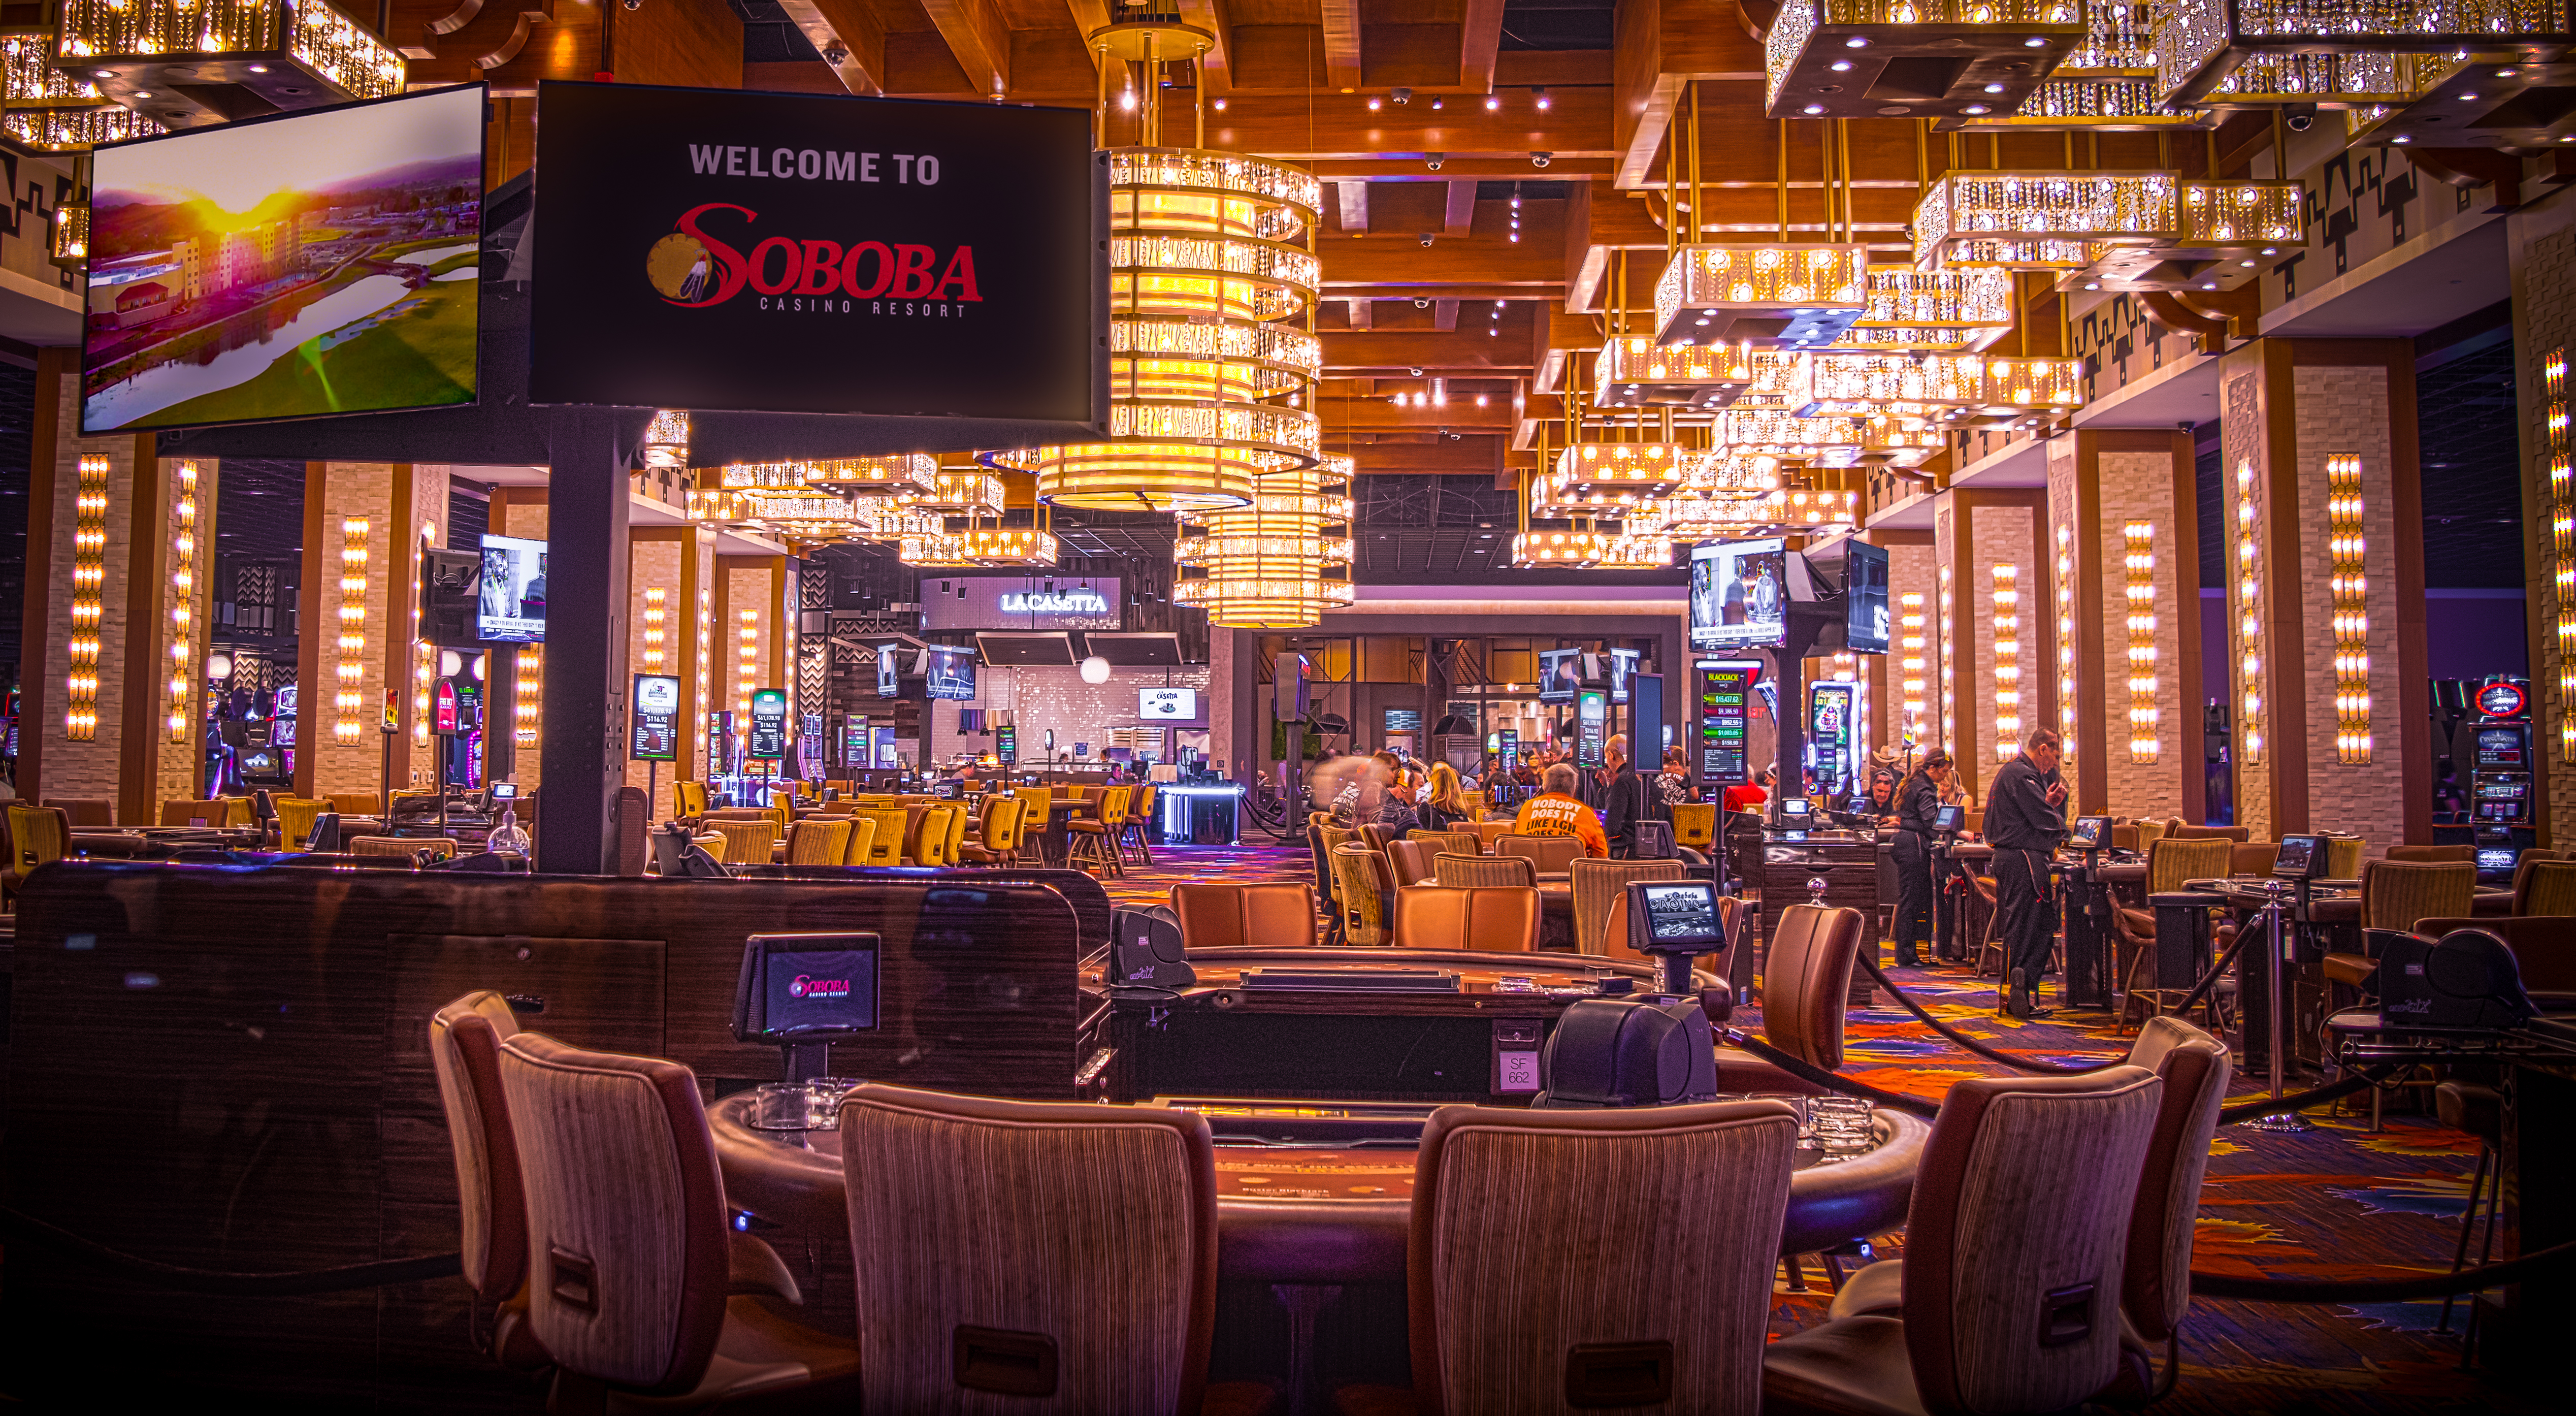 Soboba Casino Resort Goes All-In with State-of-the-Art HARMAN Professional Solutions Networked AV System